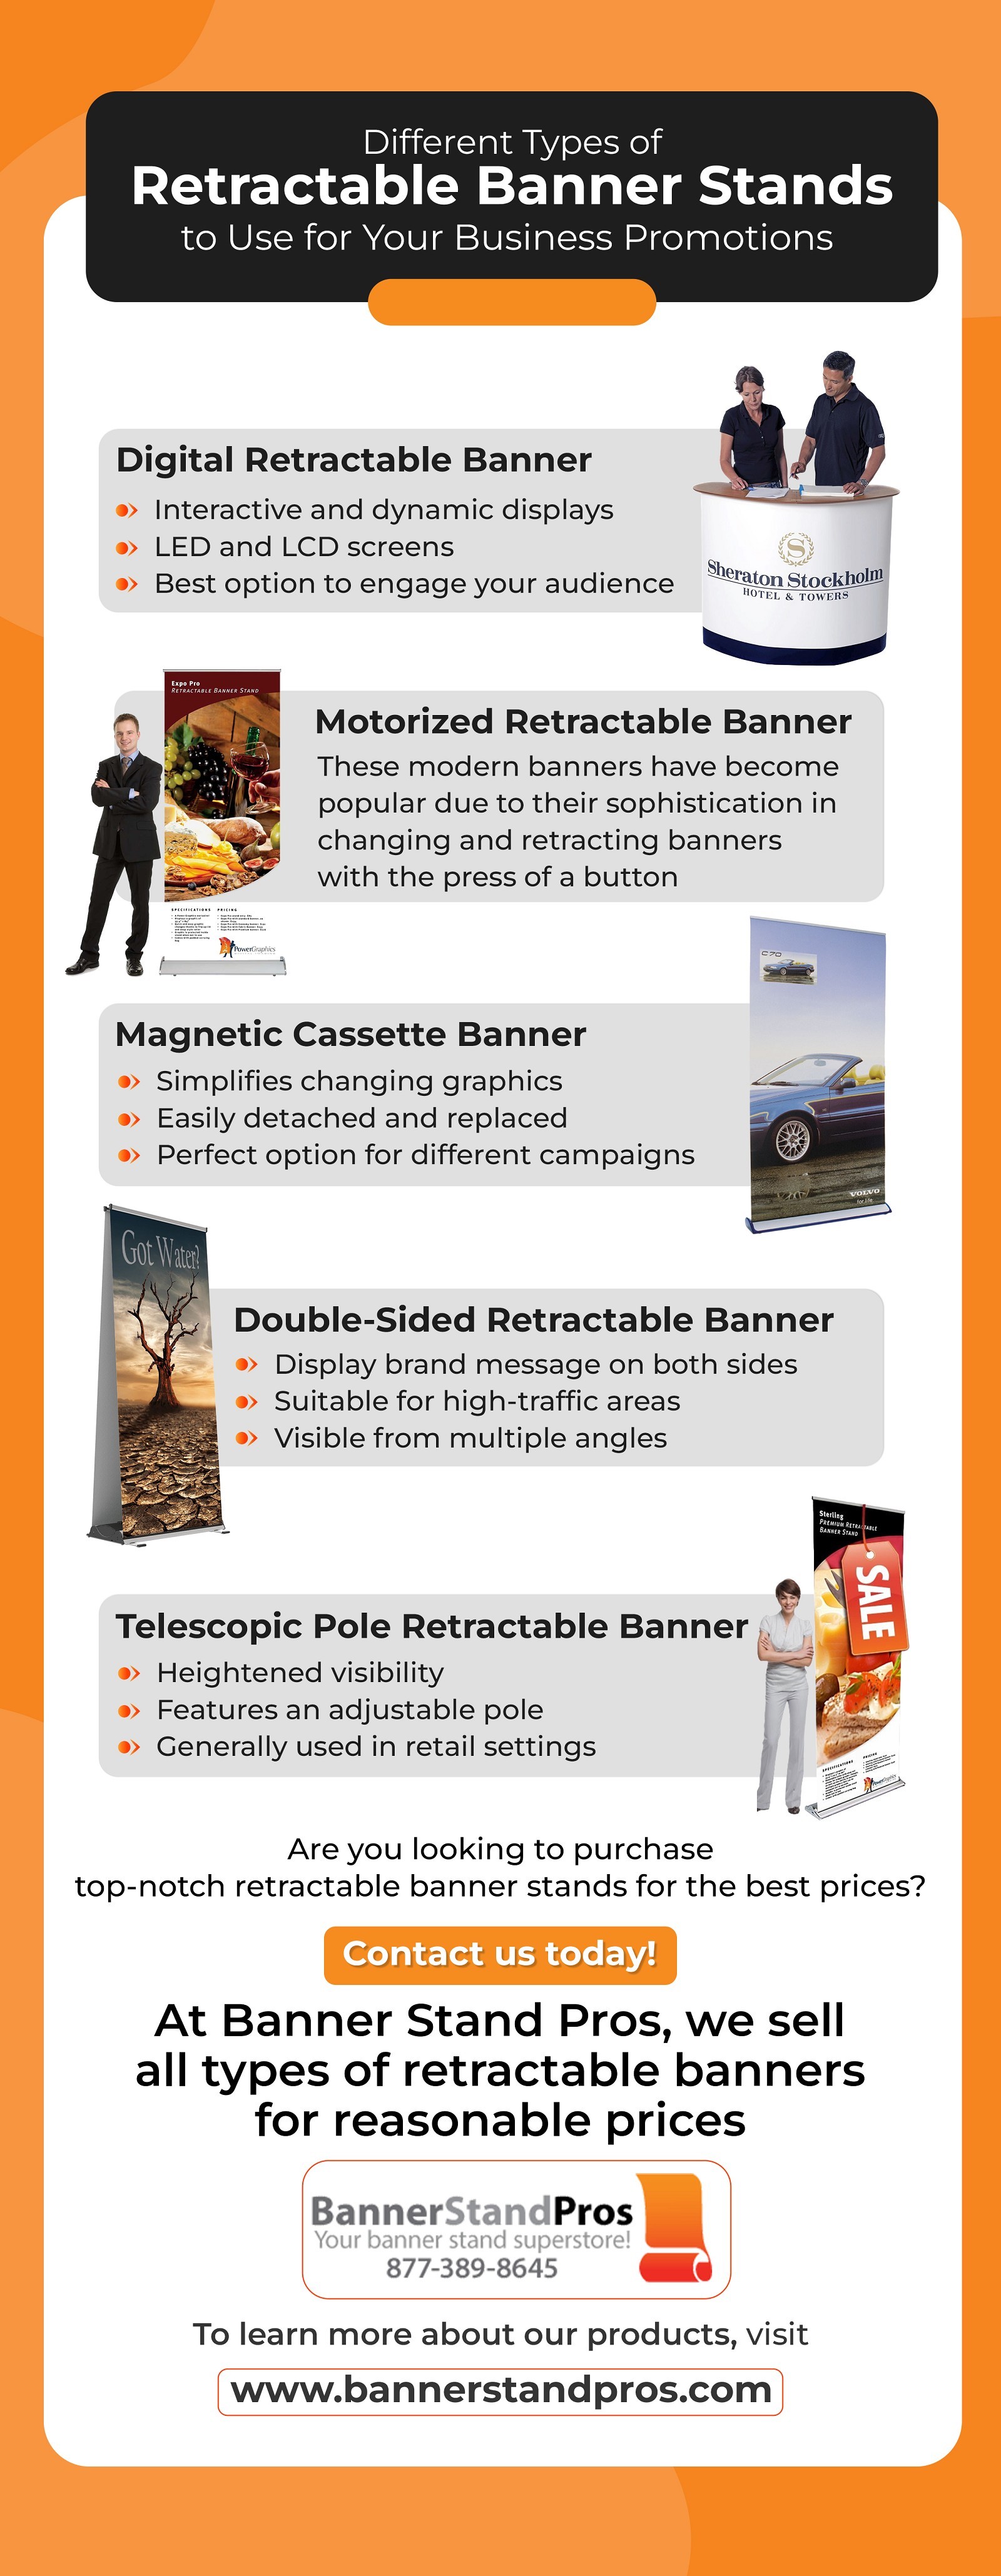 Best Retractable Banner Stands For Business Promotions